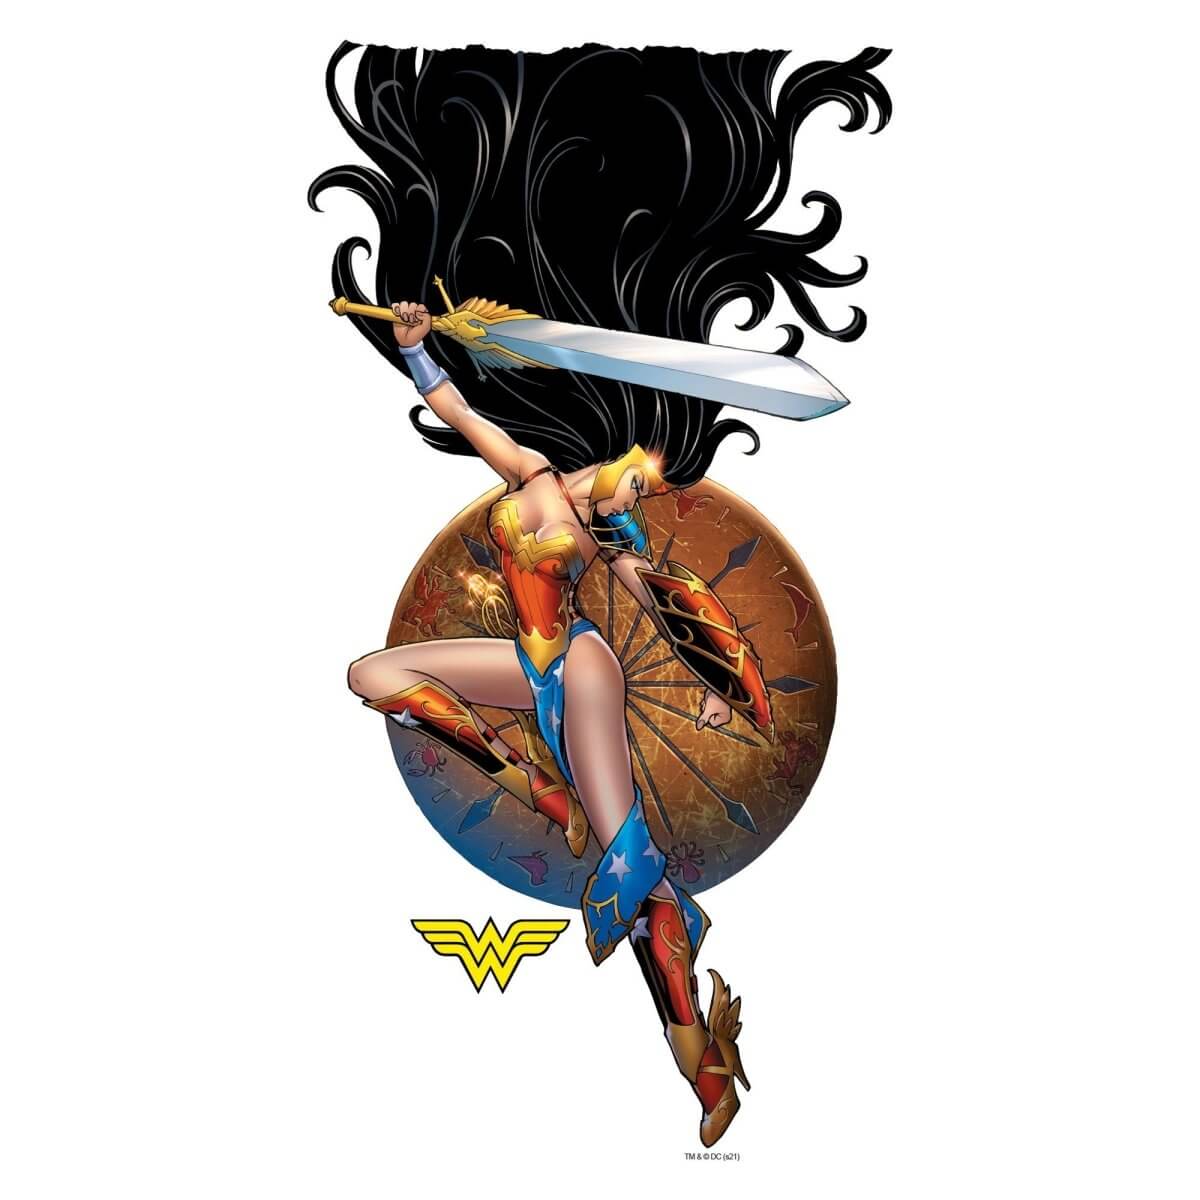 Kismet Decals Ame-Comi Girls Vol 1 Comic Cover Series Officially Licensed Wall Sticker - Easy DIY DC Comics Home, Kids or Adult Bedroom, Office, Living Room Decor Wall Art - Kismet Decals